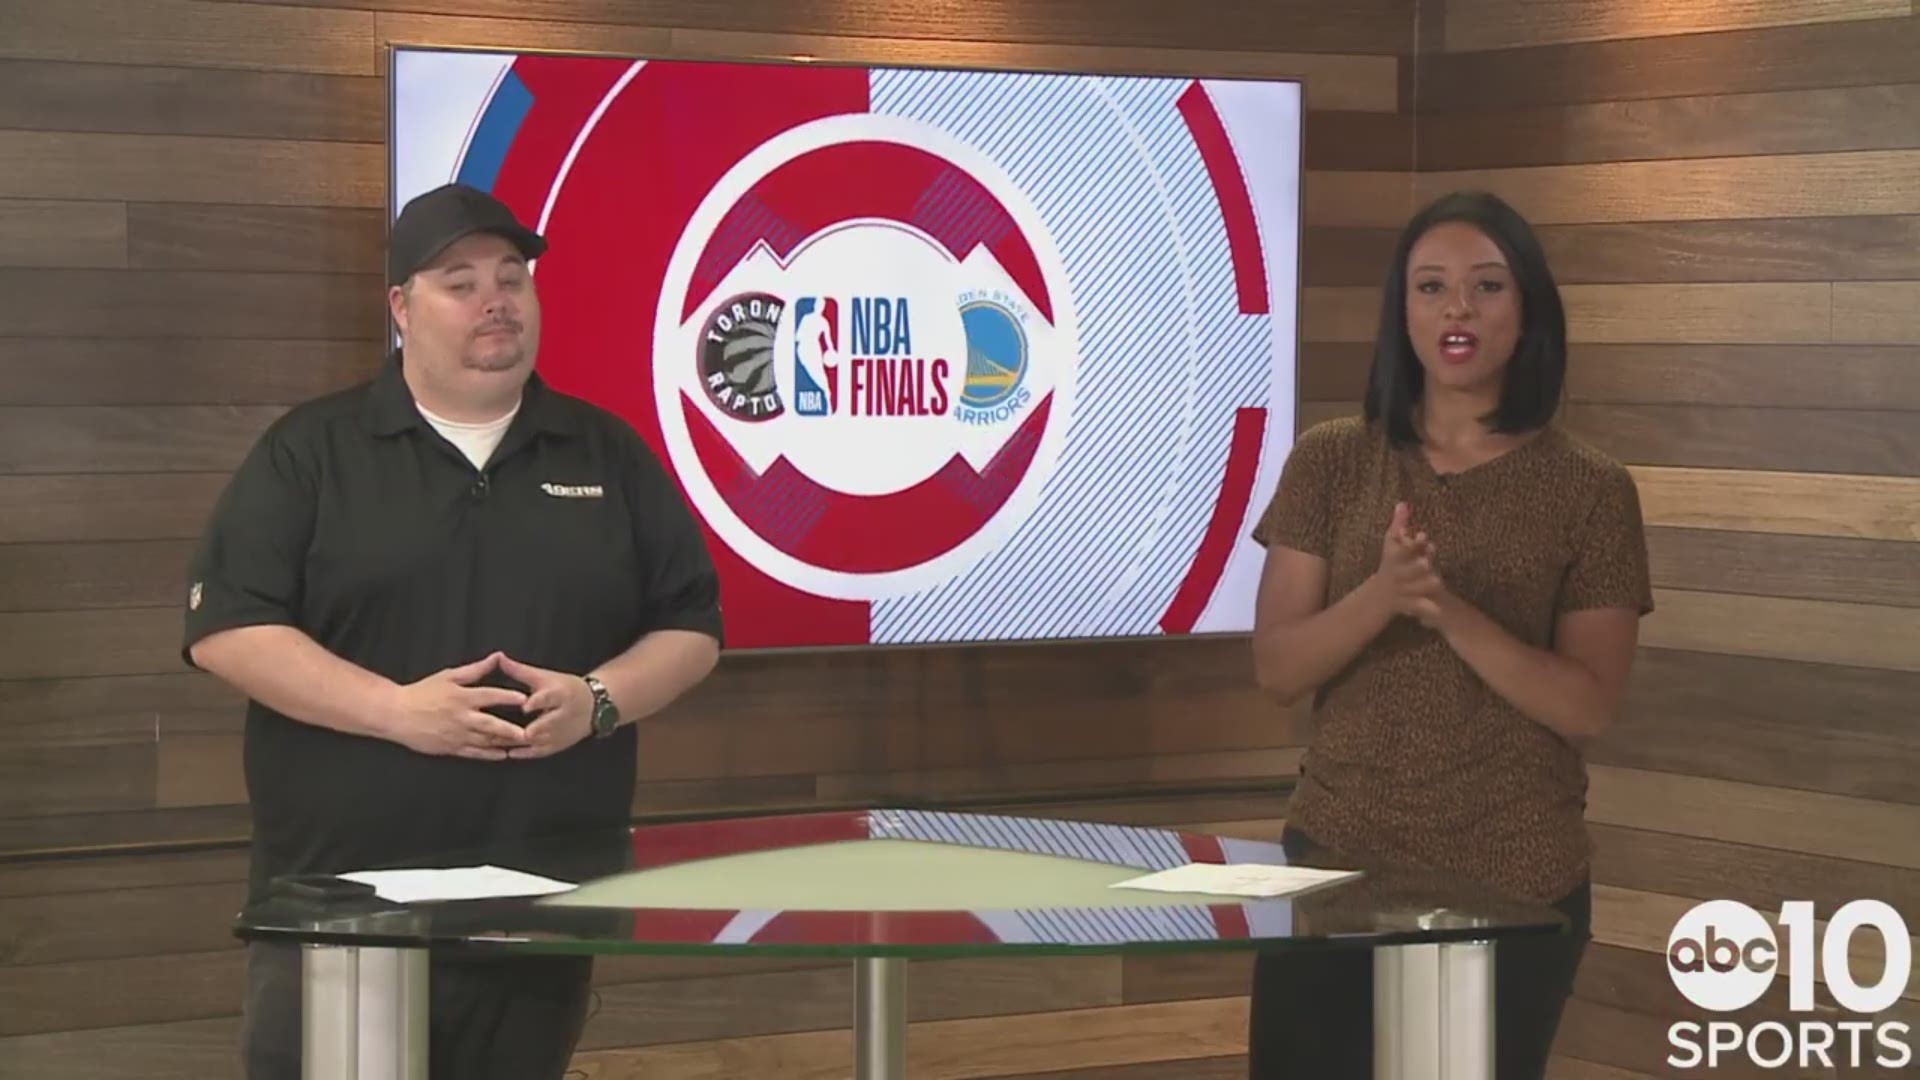 ABC10's Lina Washington and Sean Cunningham react to the Warriors' one-point victory in Game 5 on Monday over the Raptors to force Game 6 in Oakland on Thursday, trailing Toronto in the NBA Finals 3-2, and Kevin Durant's comeback cut short as he leaves the game with an Achilles injury.